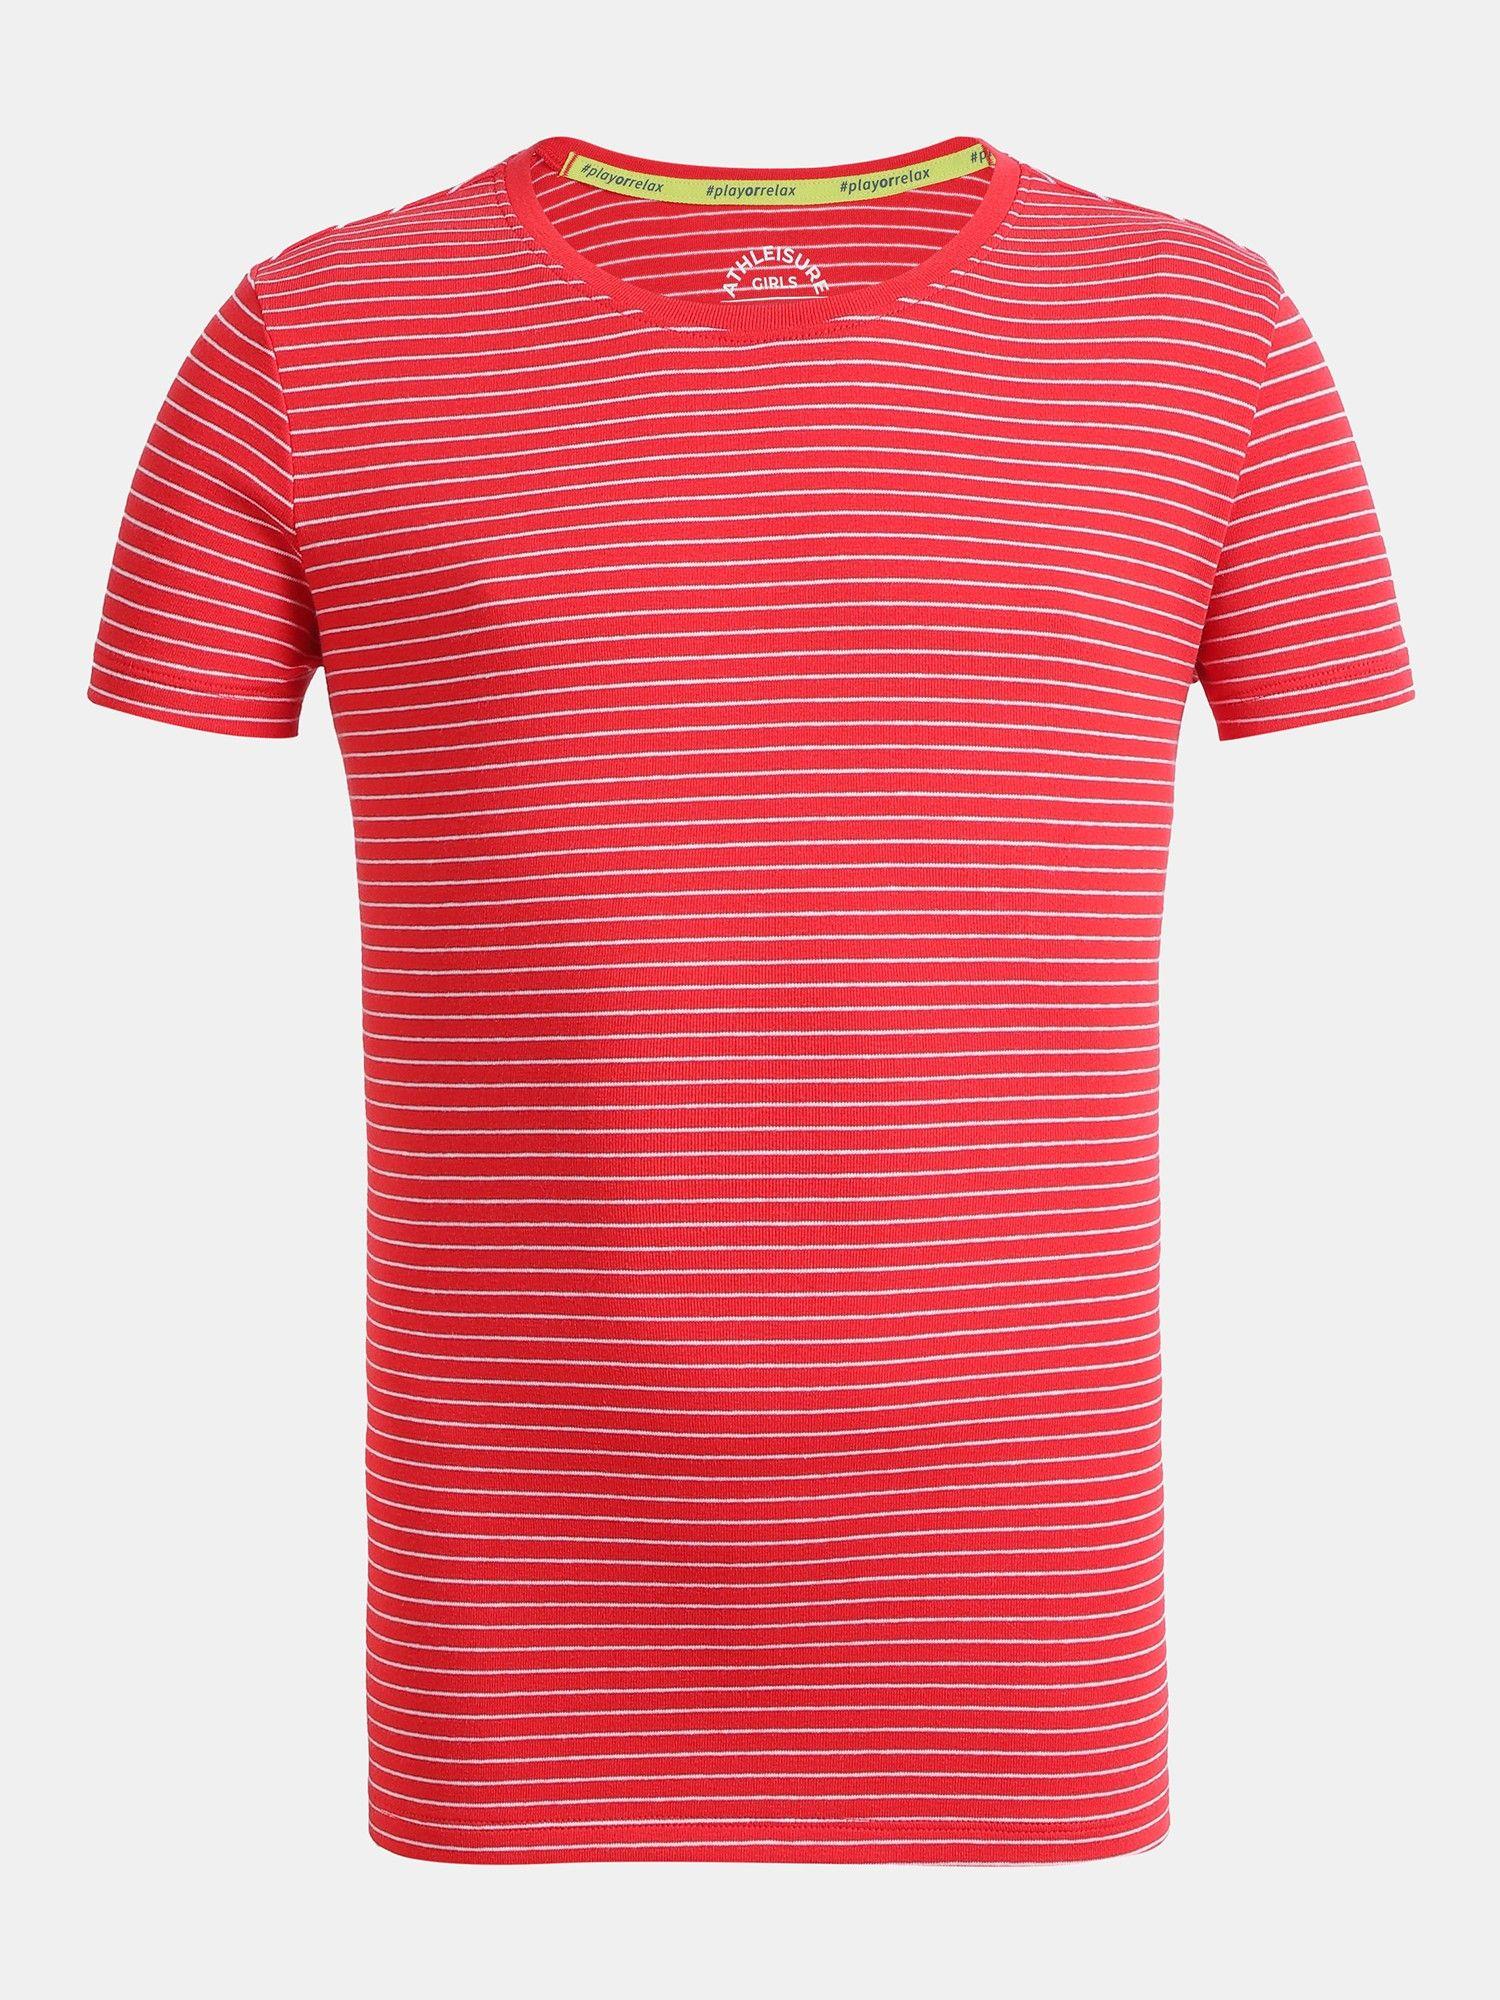 ag75 super combed striped regular fit short sleeve t-shirt - rio red